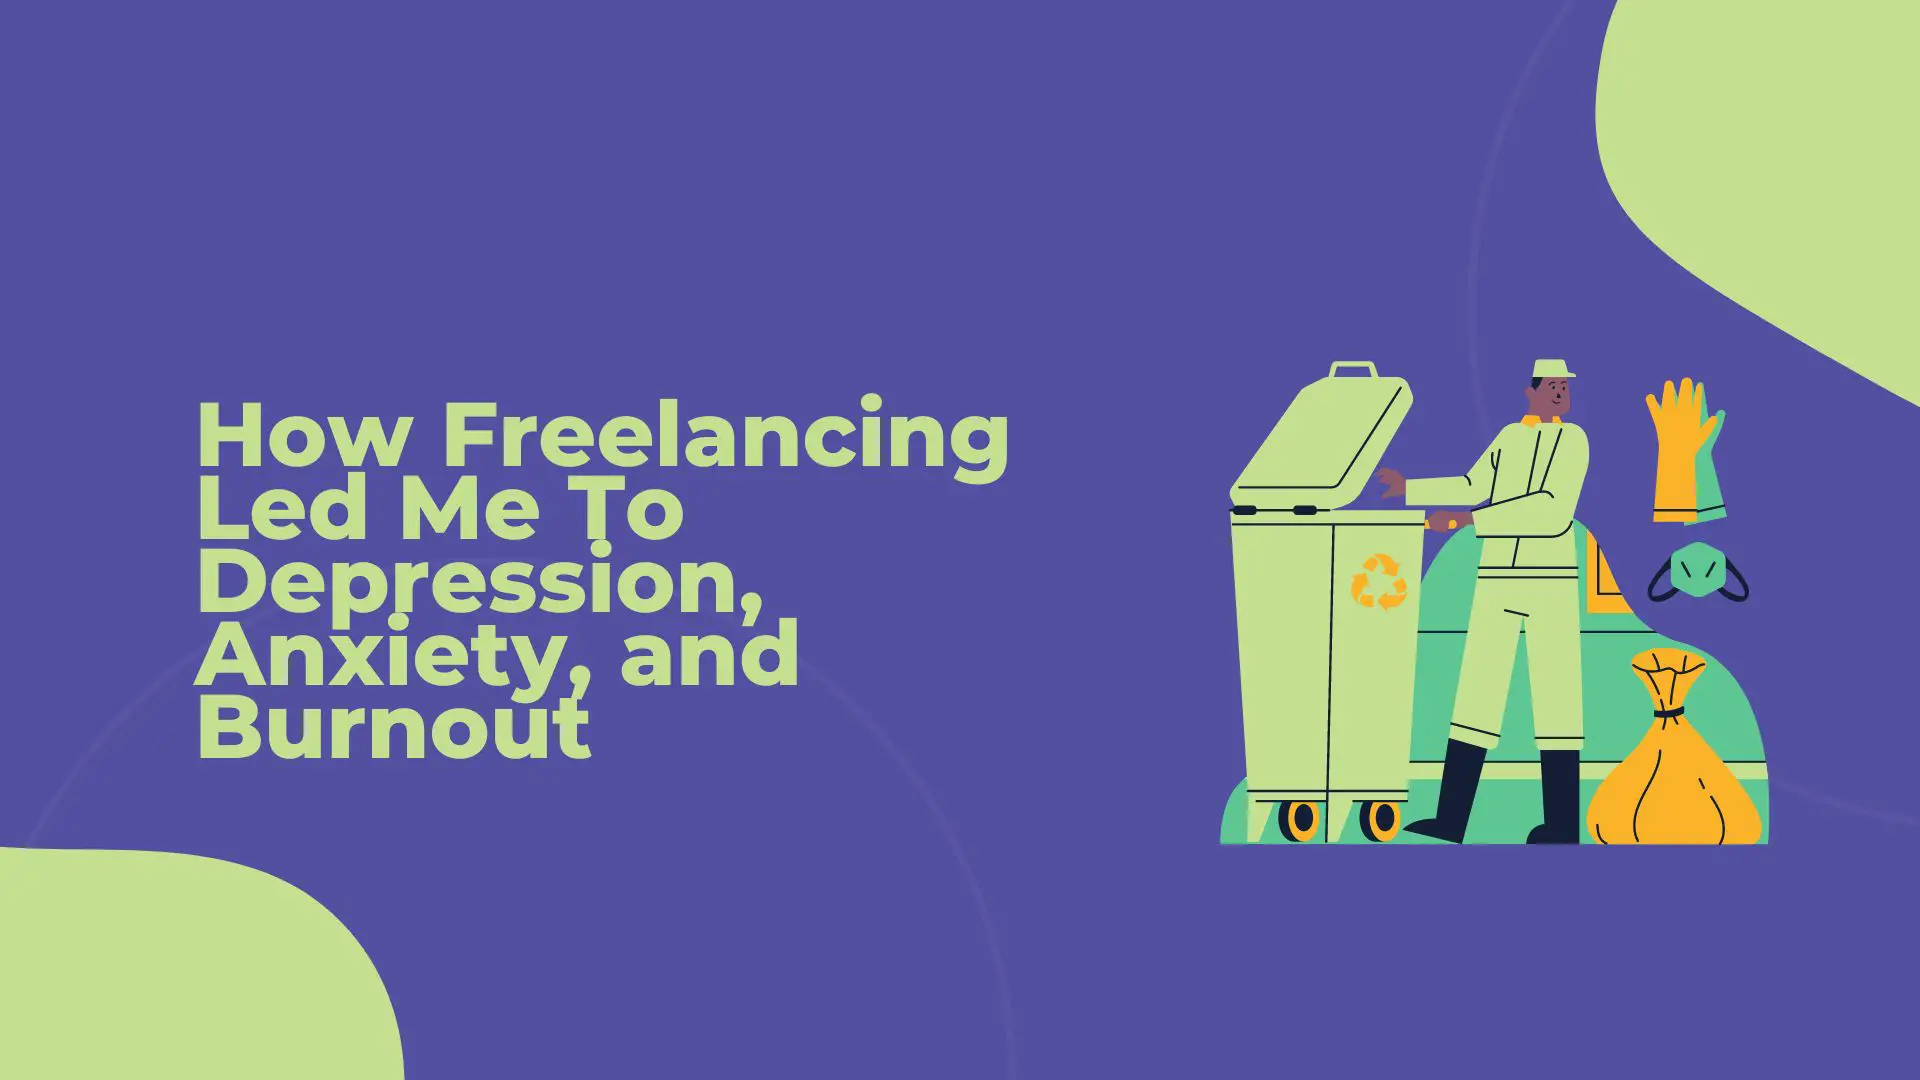 How Freelancing Led Me To Depression, Anxiety, and Burnout